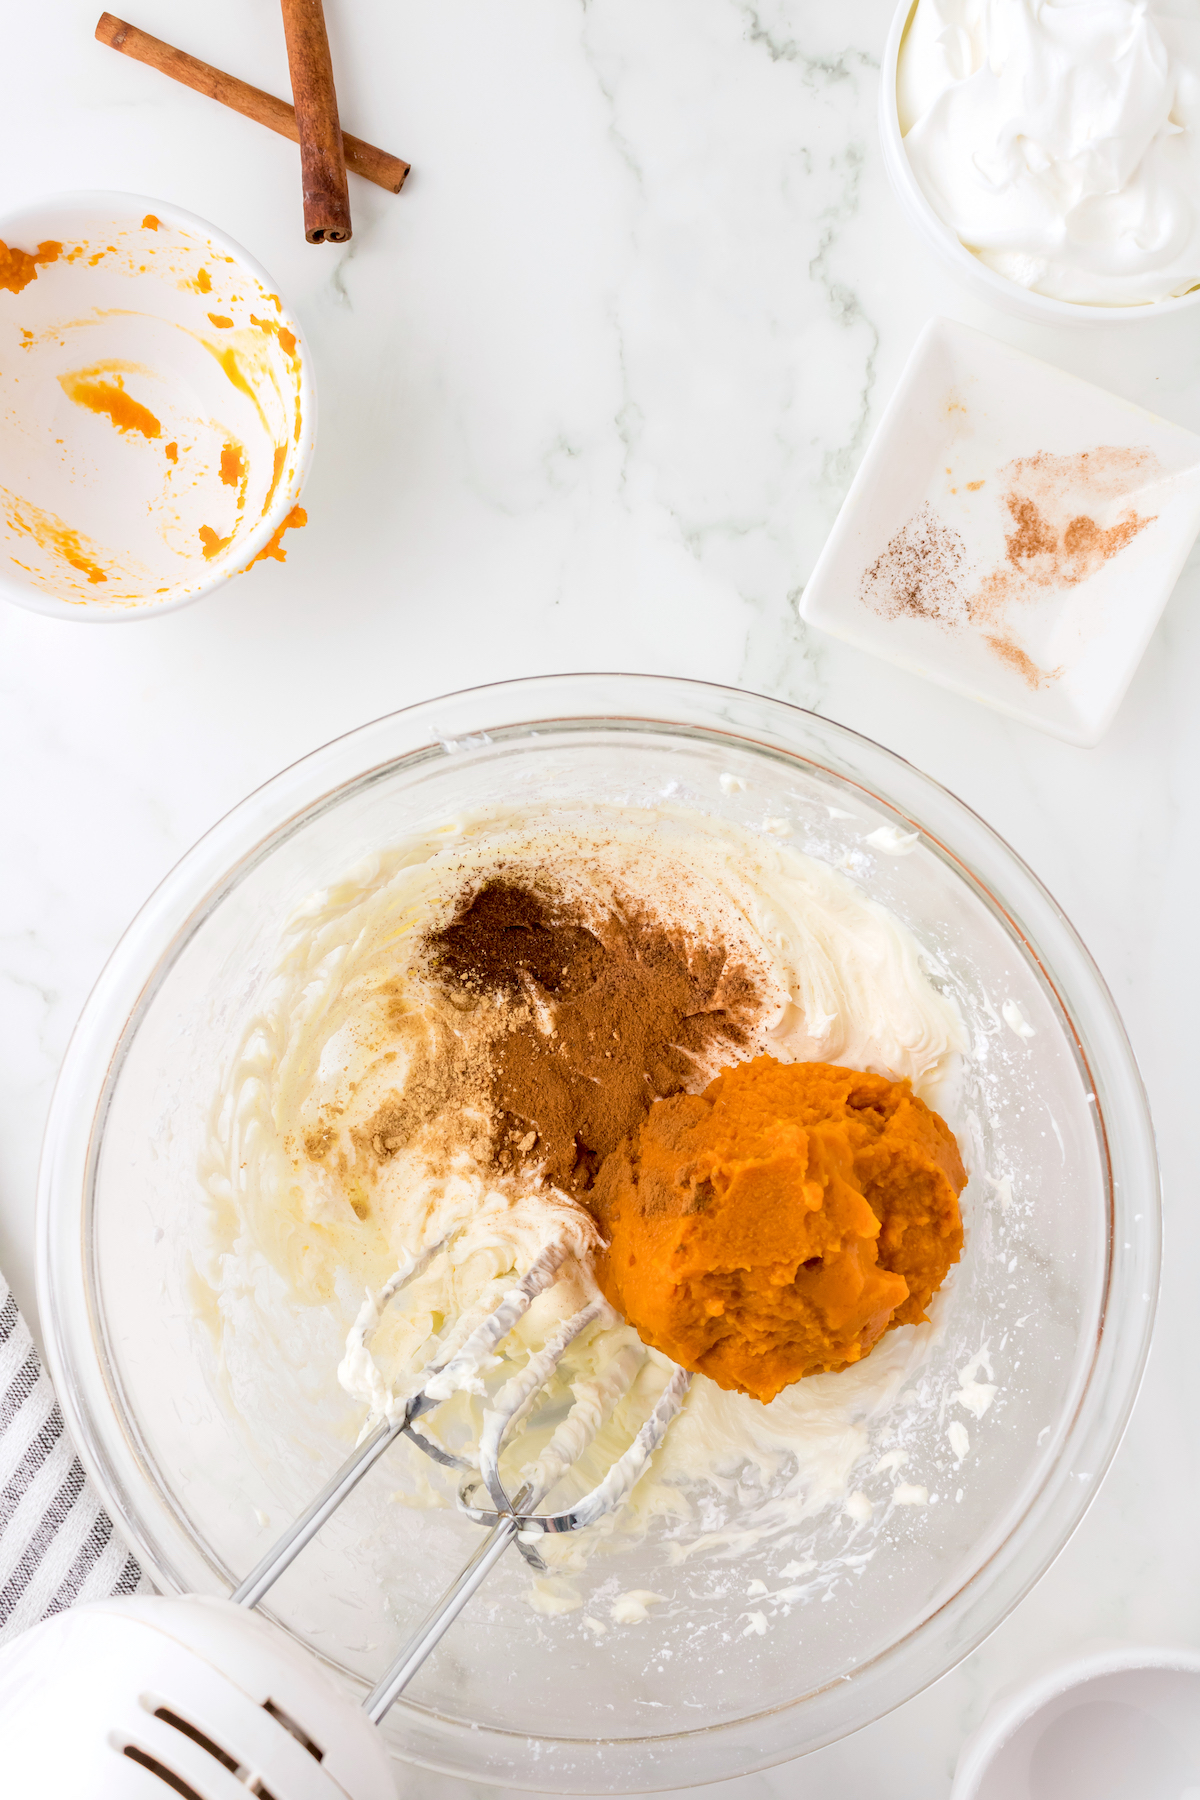 Adding pumpkin and spices to the dip mixture